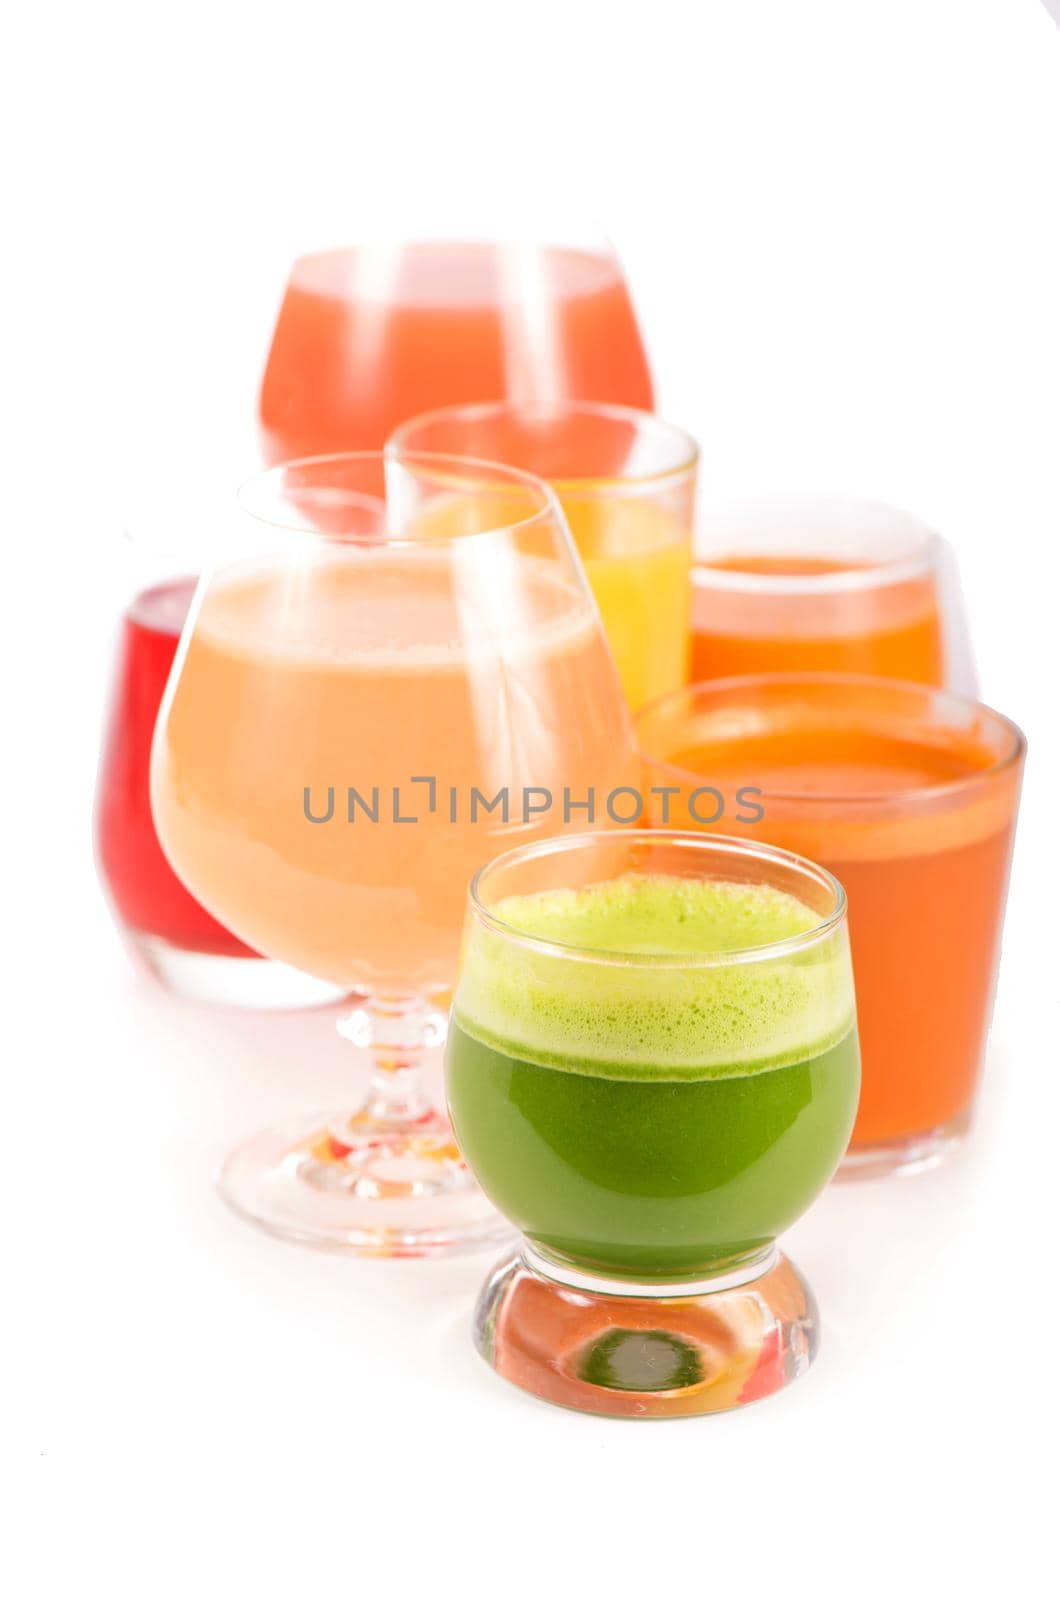 Glasses with fresh organic vegetable and fruit juices isolated on white. Detox diet